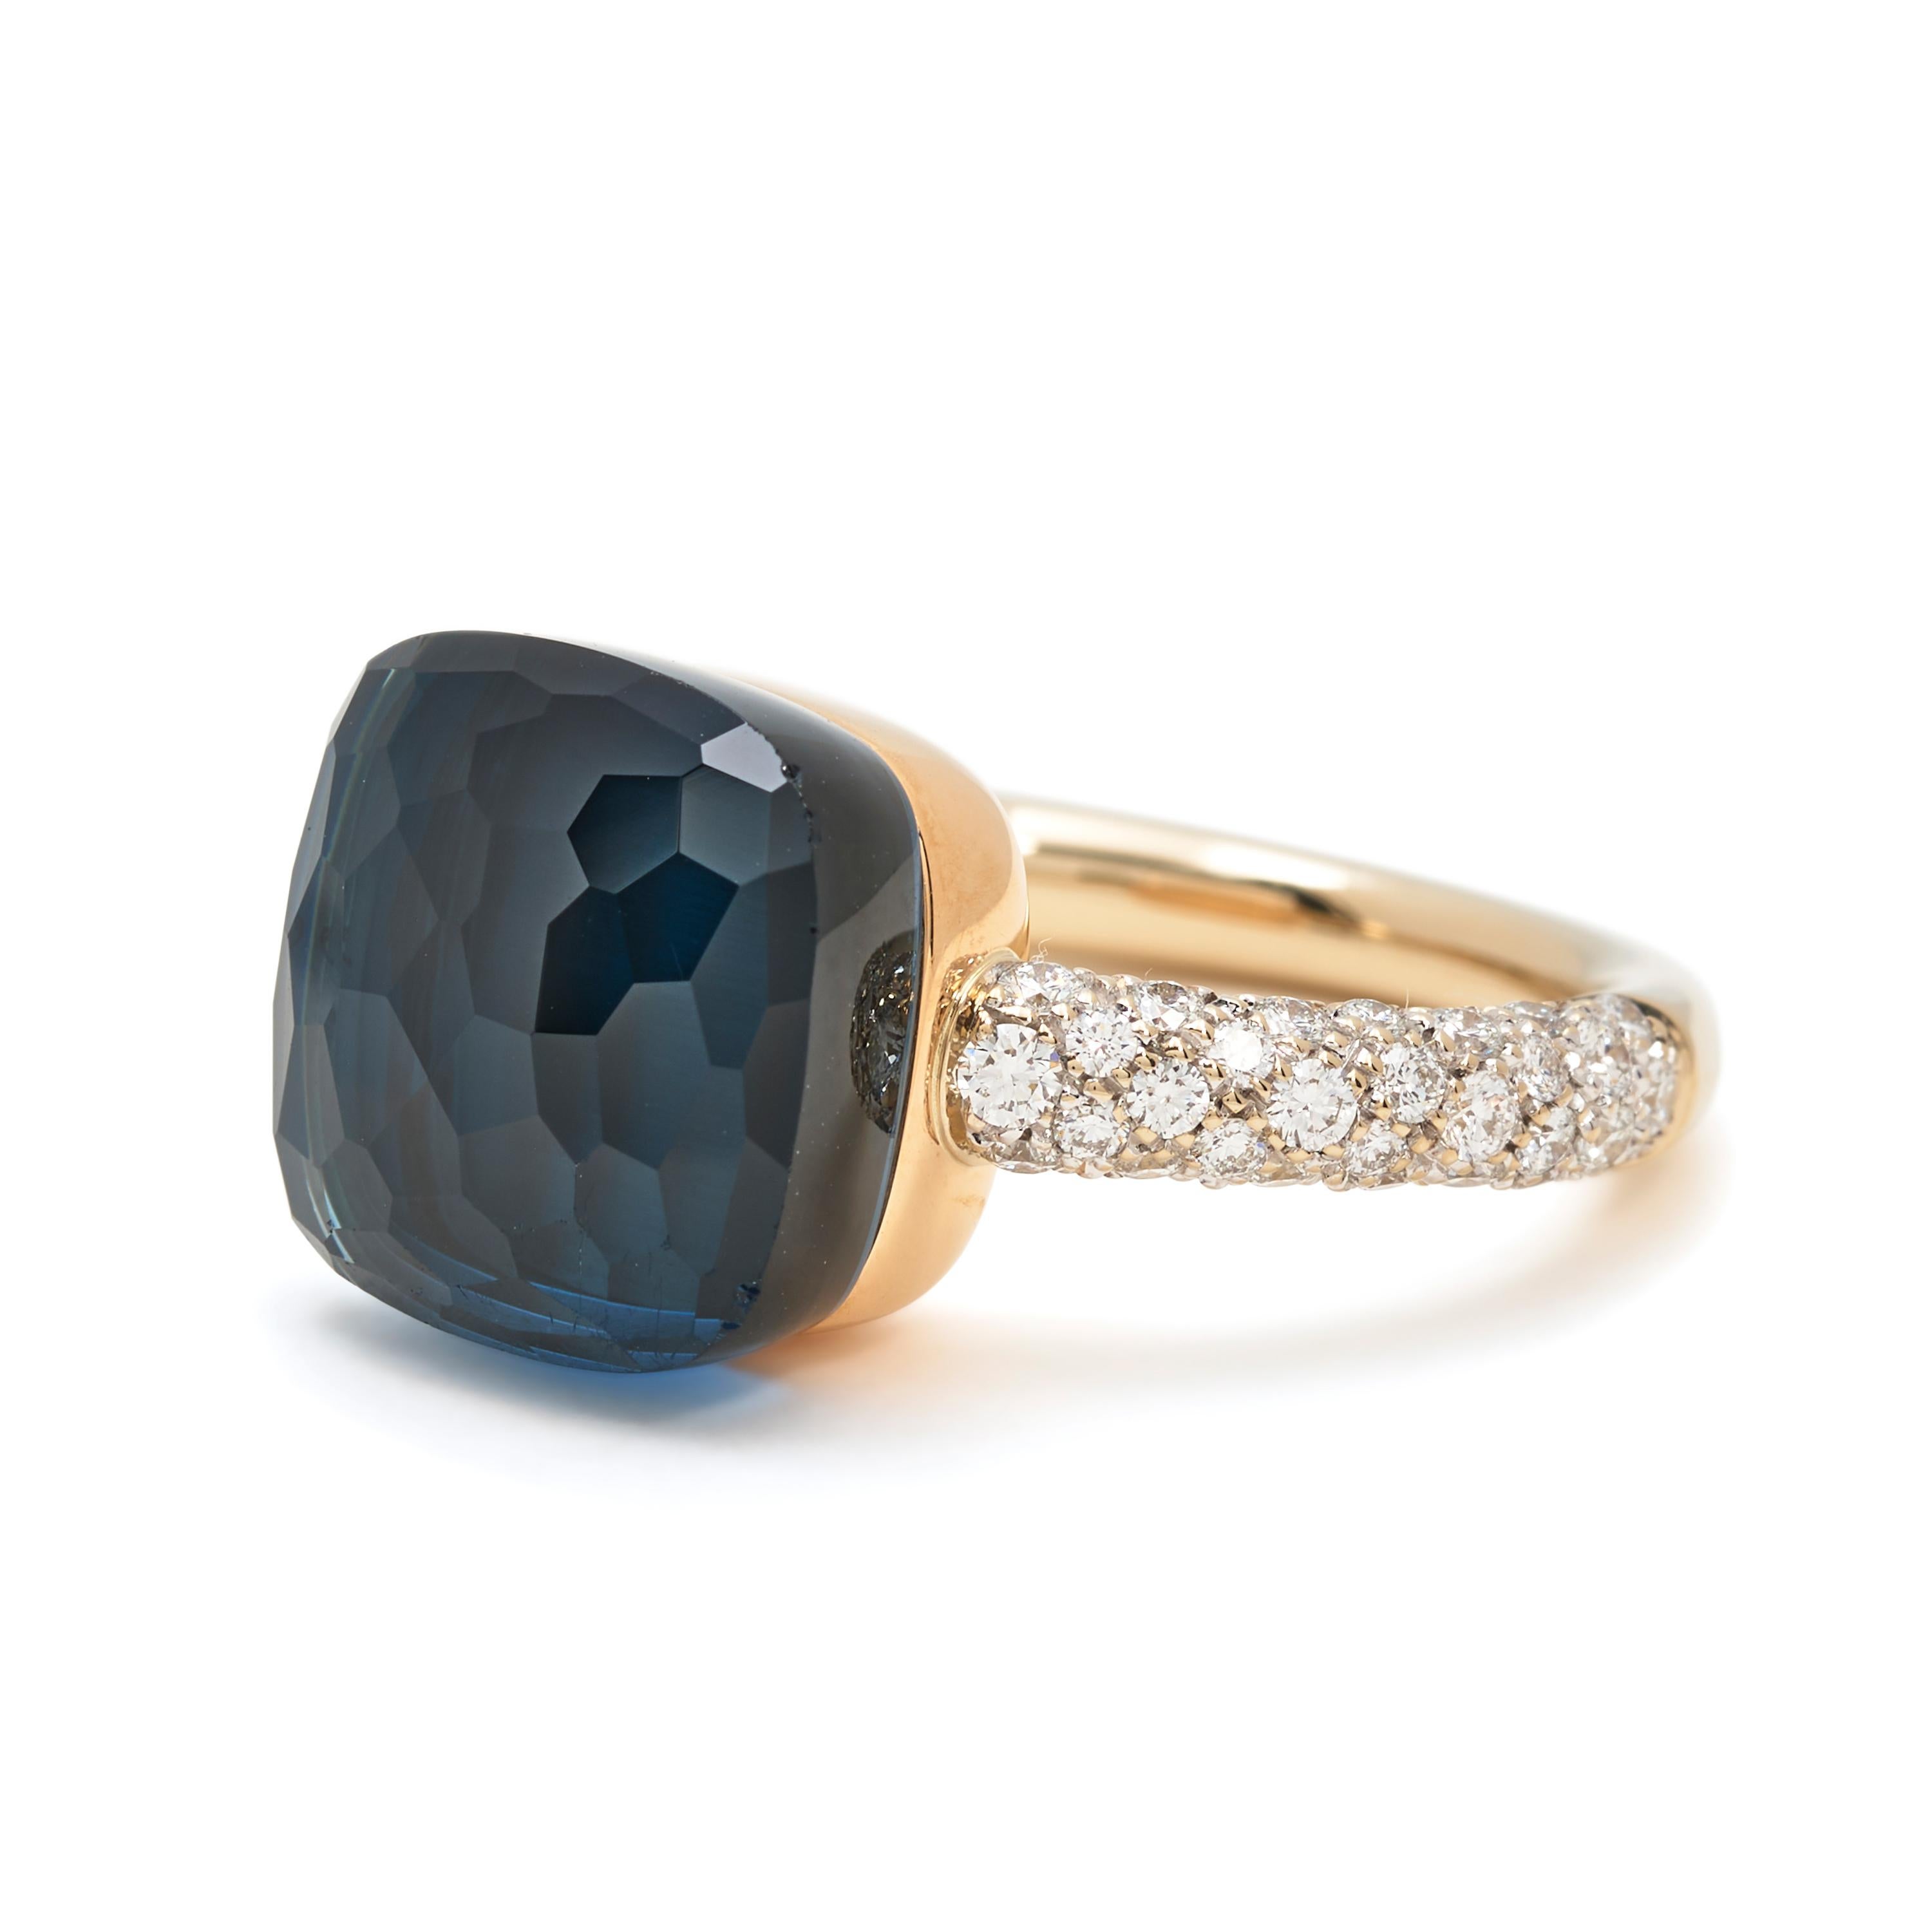 Authentic Pomellato Nudo ring crafted in 18 karat rose and white gold.  The ring features a faceted London blue topaz and diamond set band with approximately .70 carats total diamond weight.  Size 6 1/2.  Signed Pomellato, 750, with hallmark.  Ring